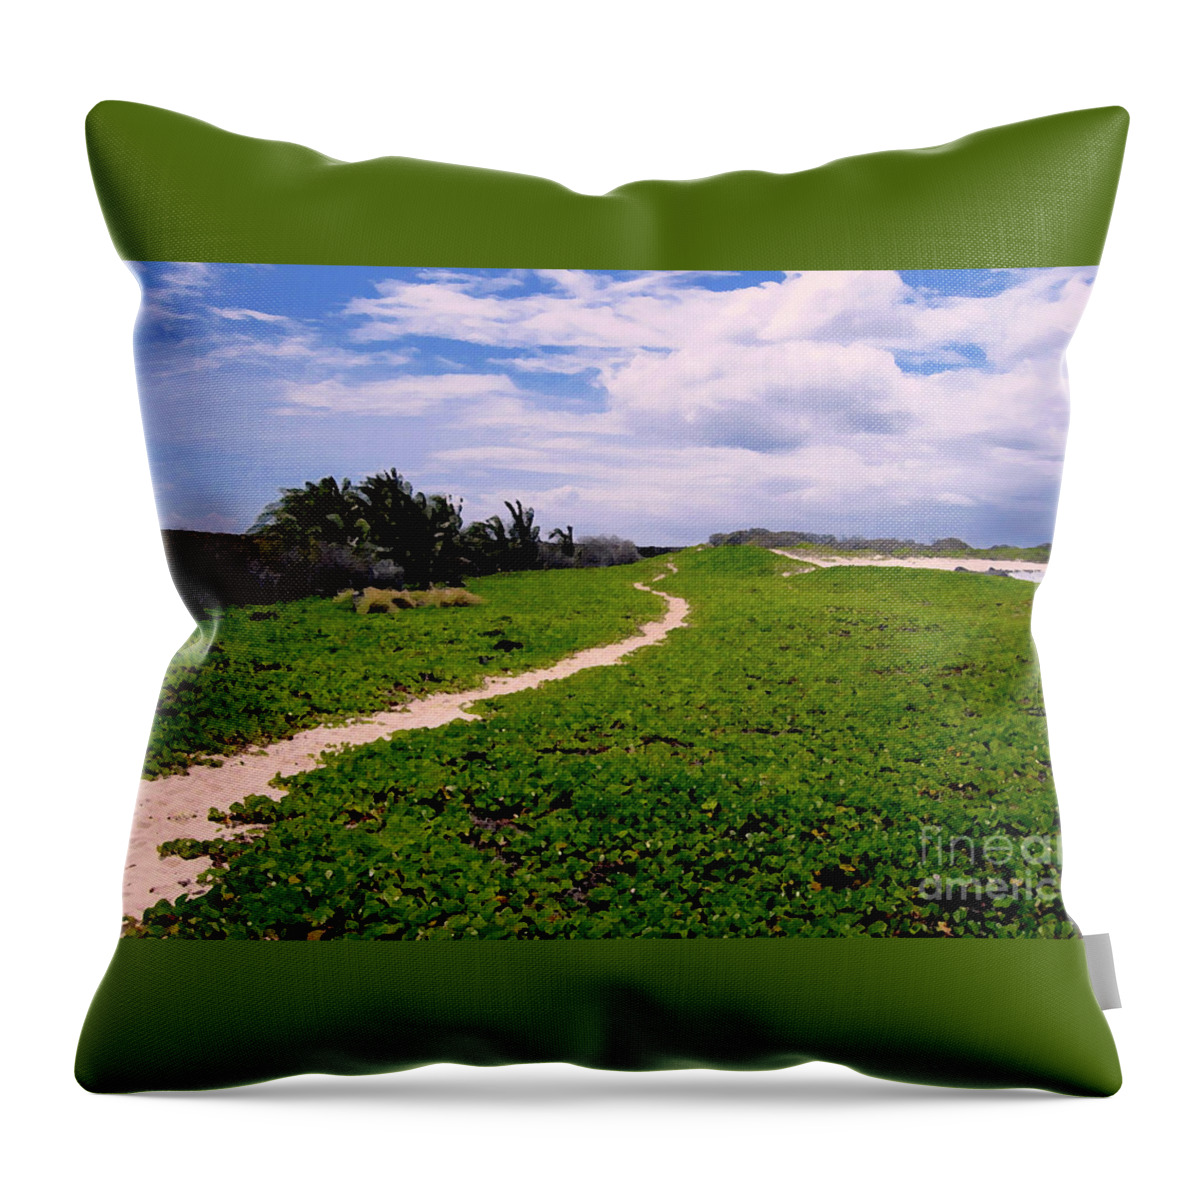 Sand Dunes Throw Pillow featuring the photograph A Path Thru the Dunes by Bette Phelan